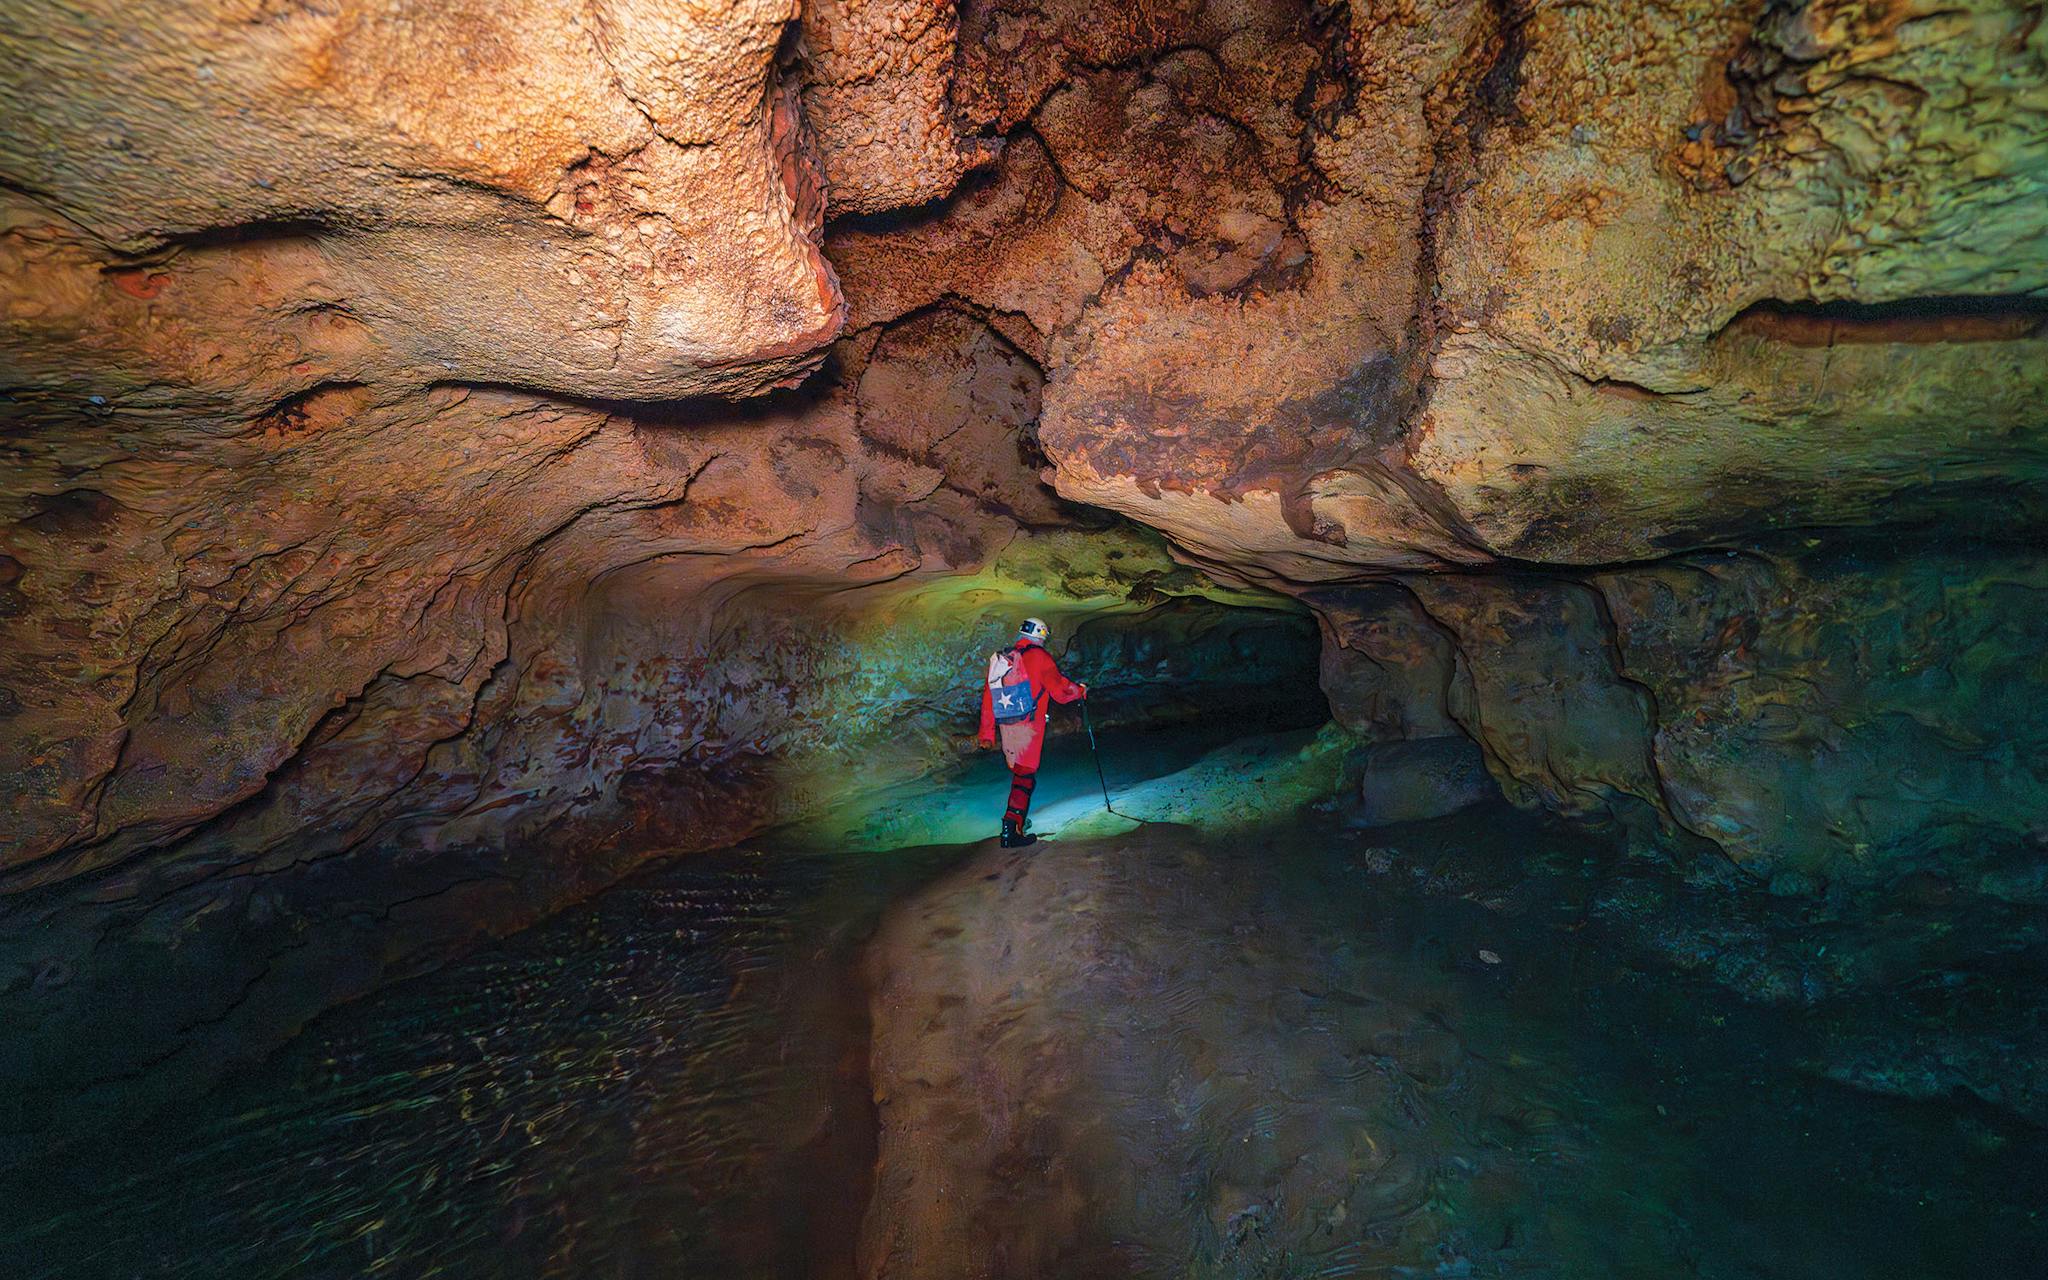 Steele at Spring Creek Cave, which he first explored in the late seventies.